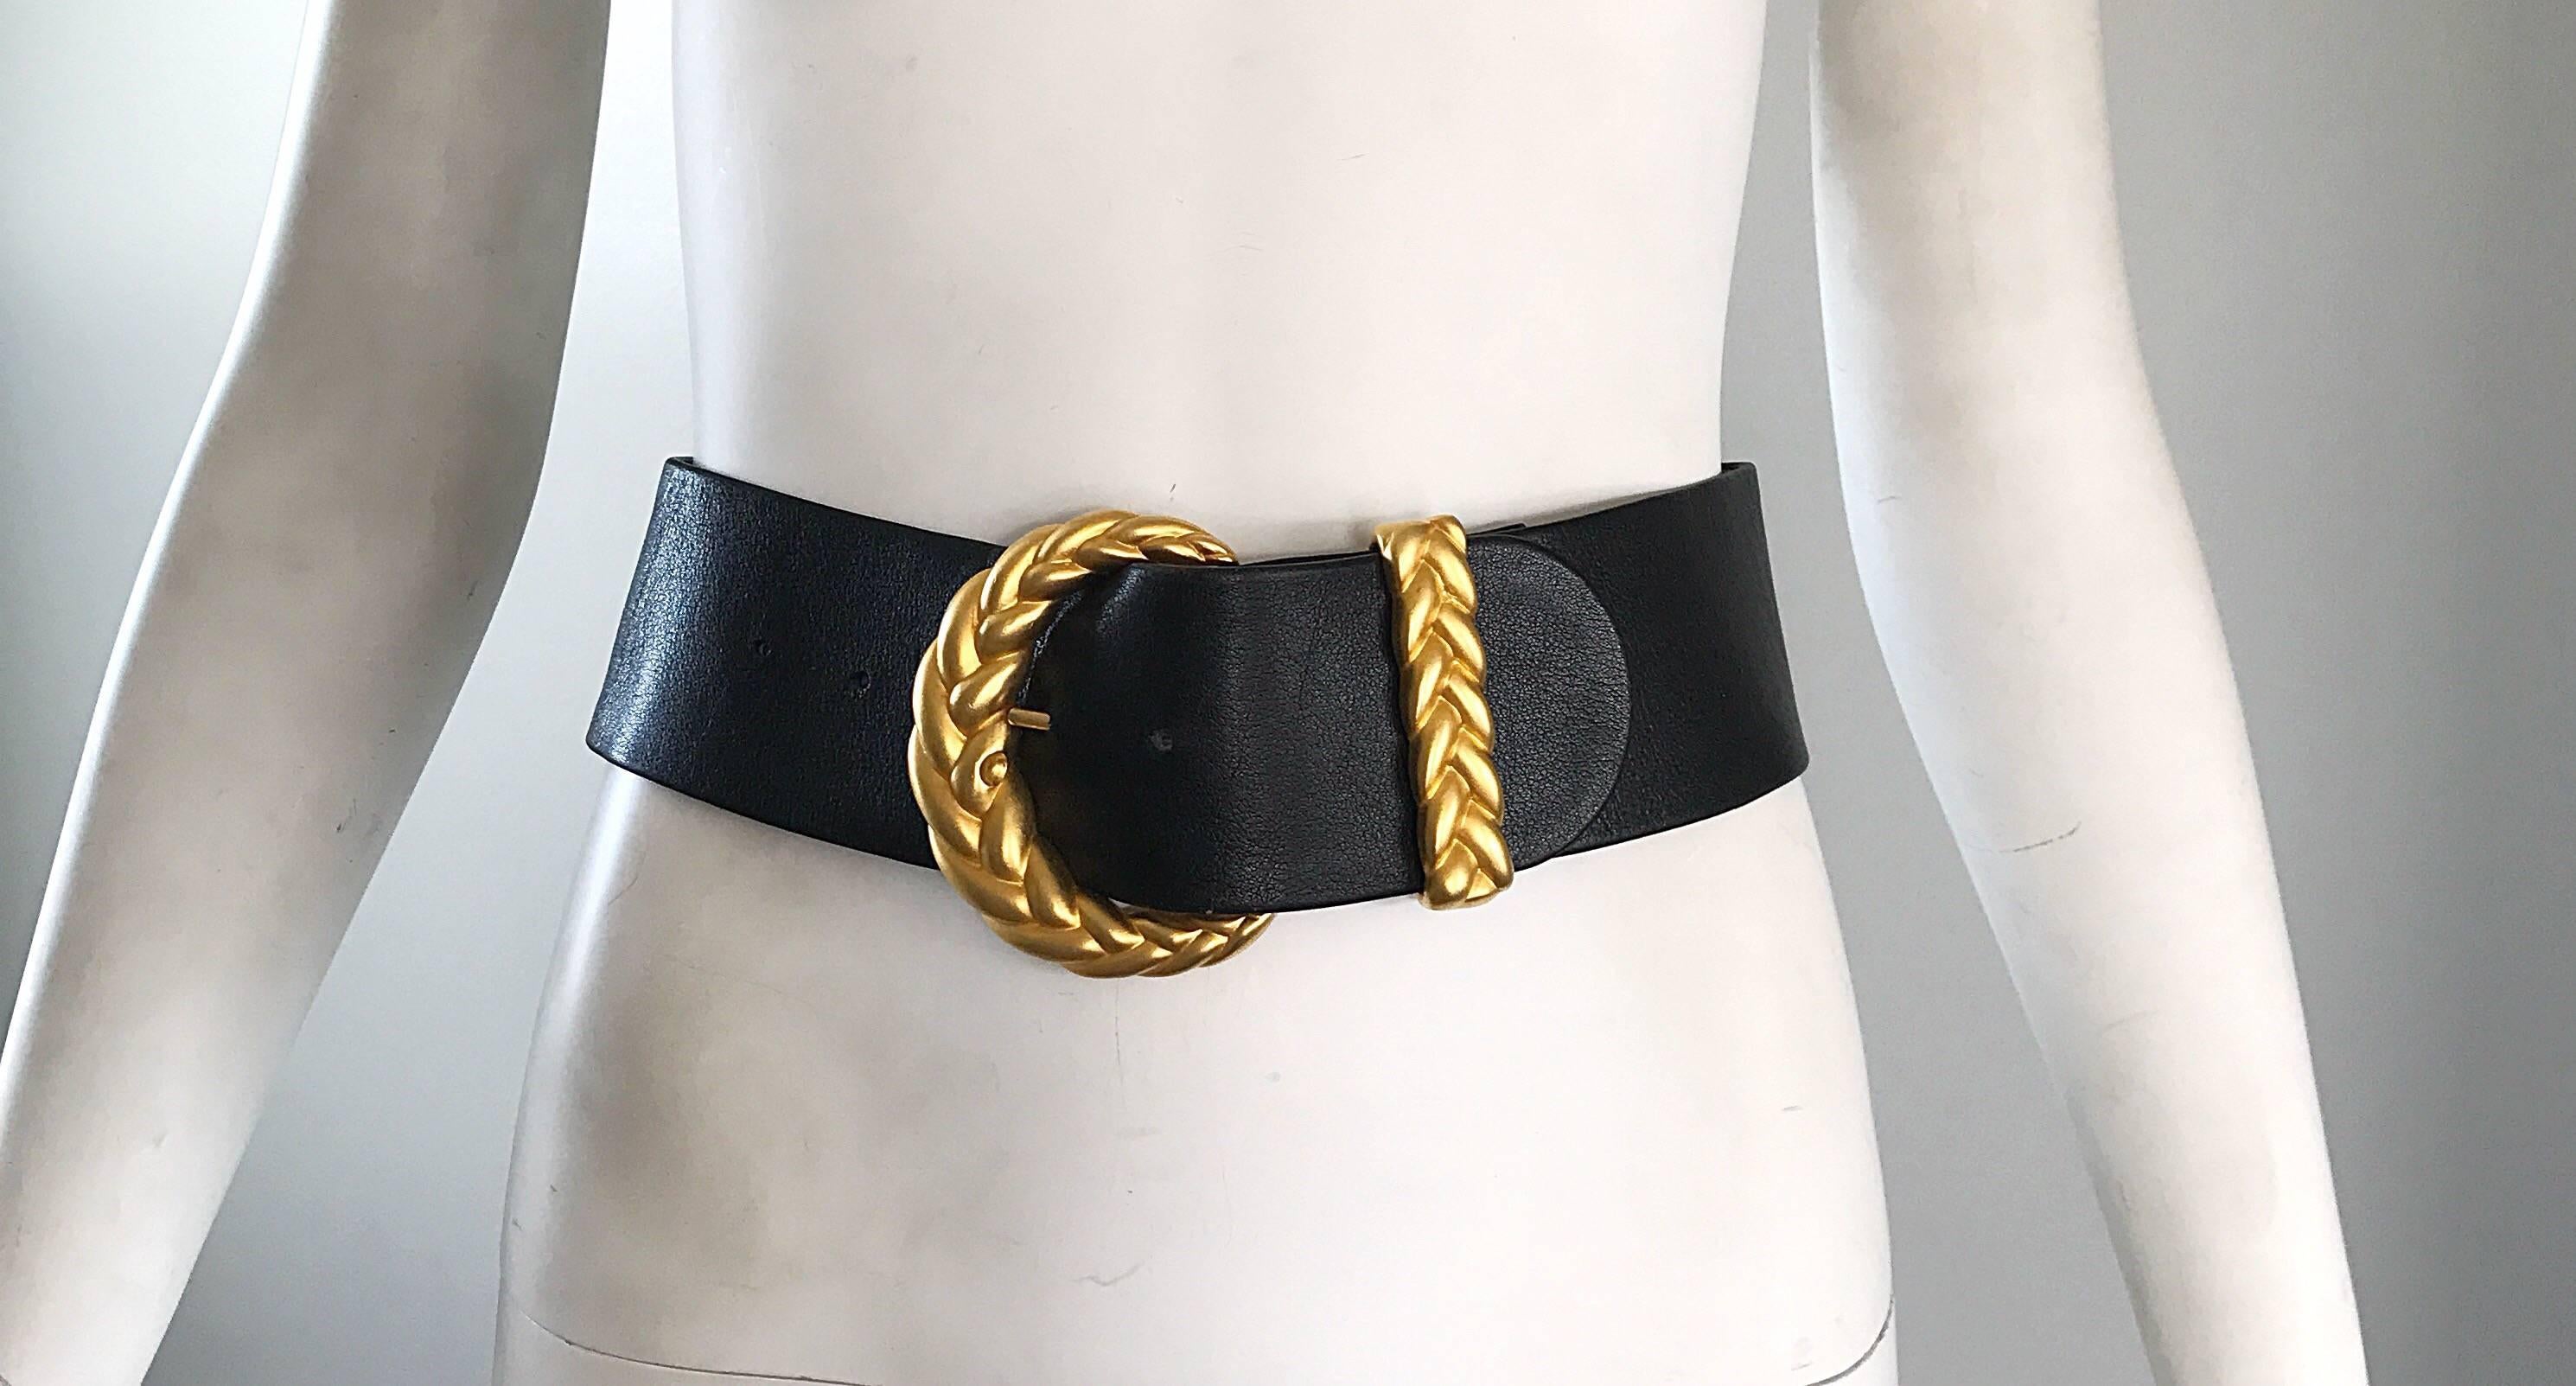 Brand new chic 1990s ANNE KLEIN for CALDERON black and gold wide leather belt! Features an oversized matte gold braided buckle and loop. Can easily be dressed up or down. Great with jeans, a skirt, or over a dress! In great unworn condition. Made in